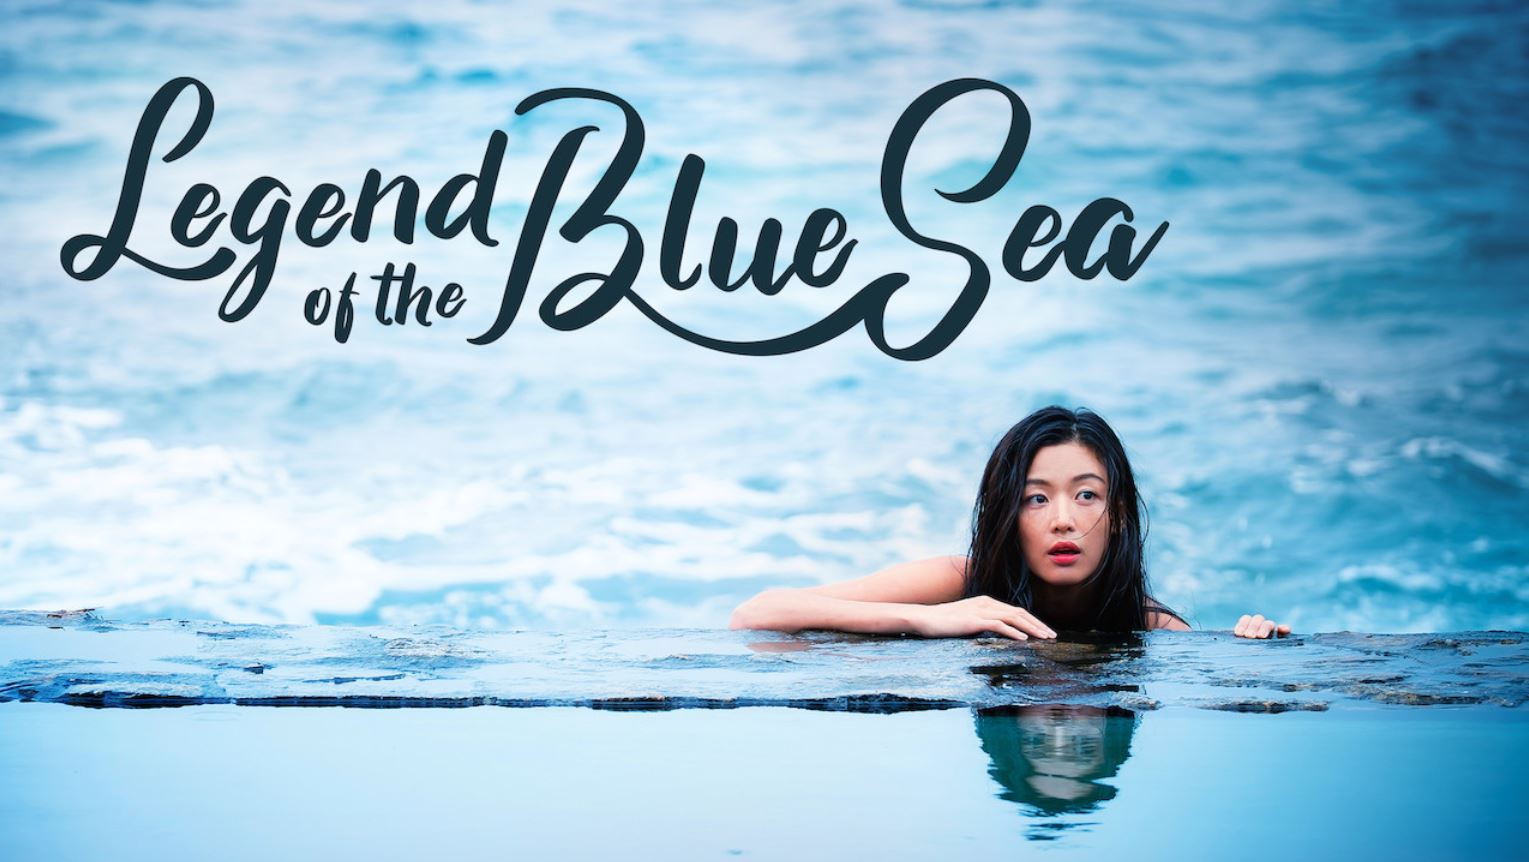 Legend of the Blue Sea Season 2: Release Date and Preview - OtakuKart